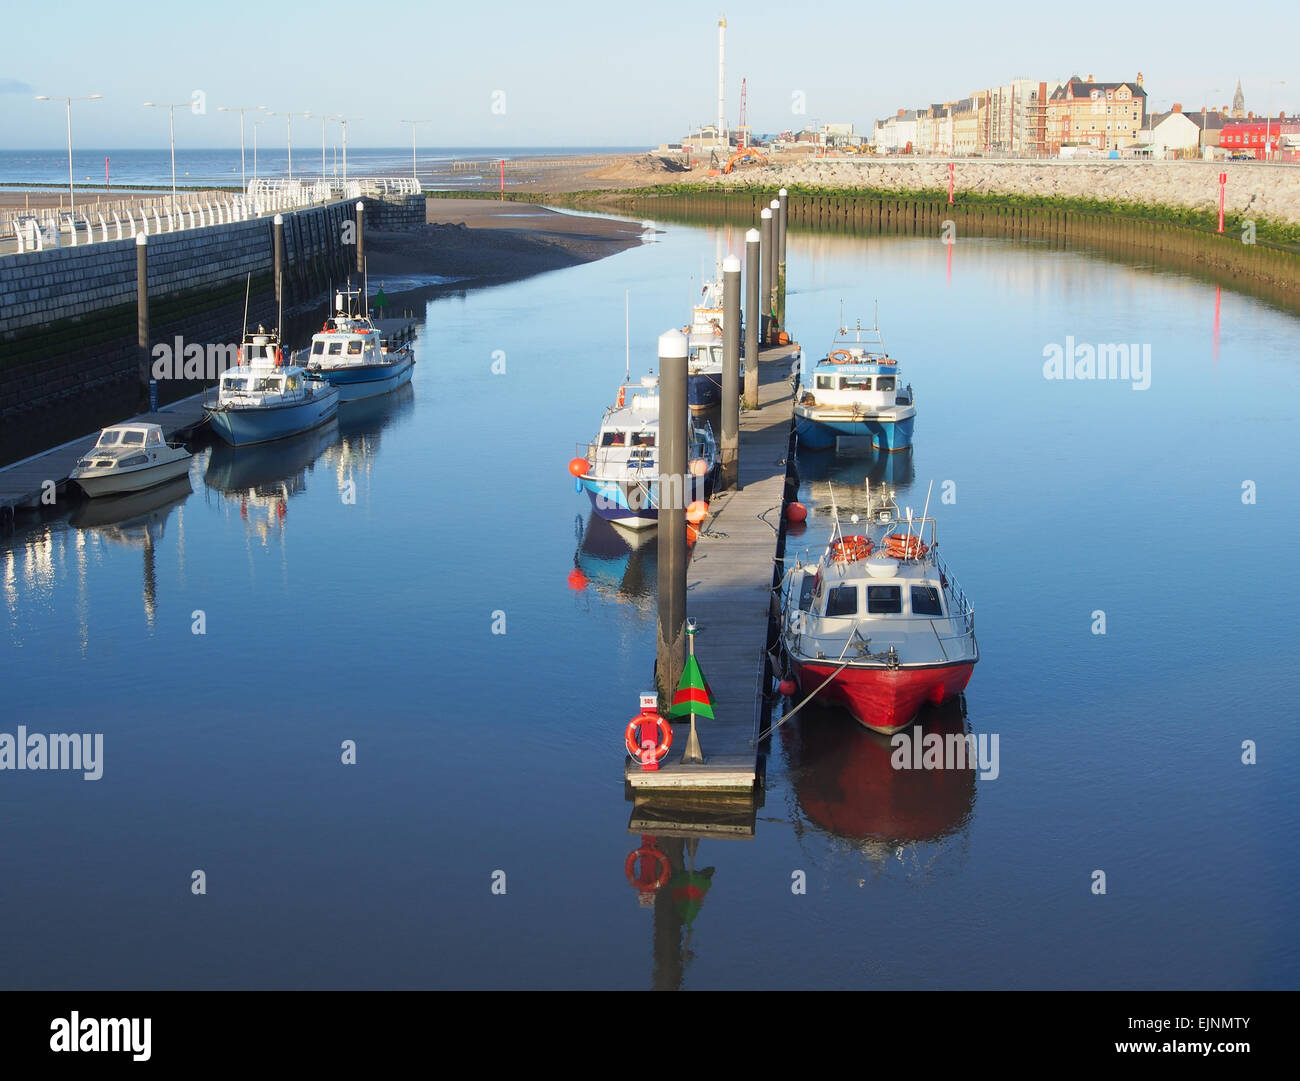 Boats moored at the marina in Kimnel Bay, Rhyl in Wales taken from the Dragon Bridge with Rhyl in the background. Stock Photo